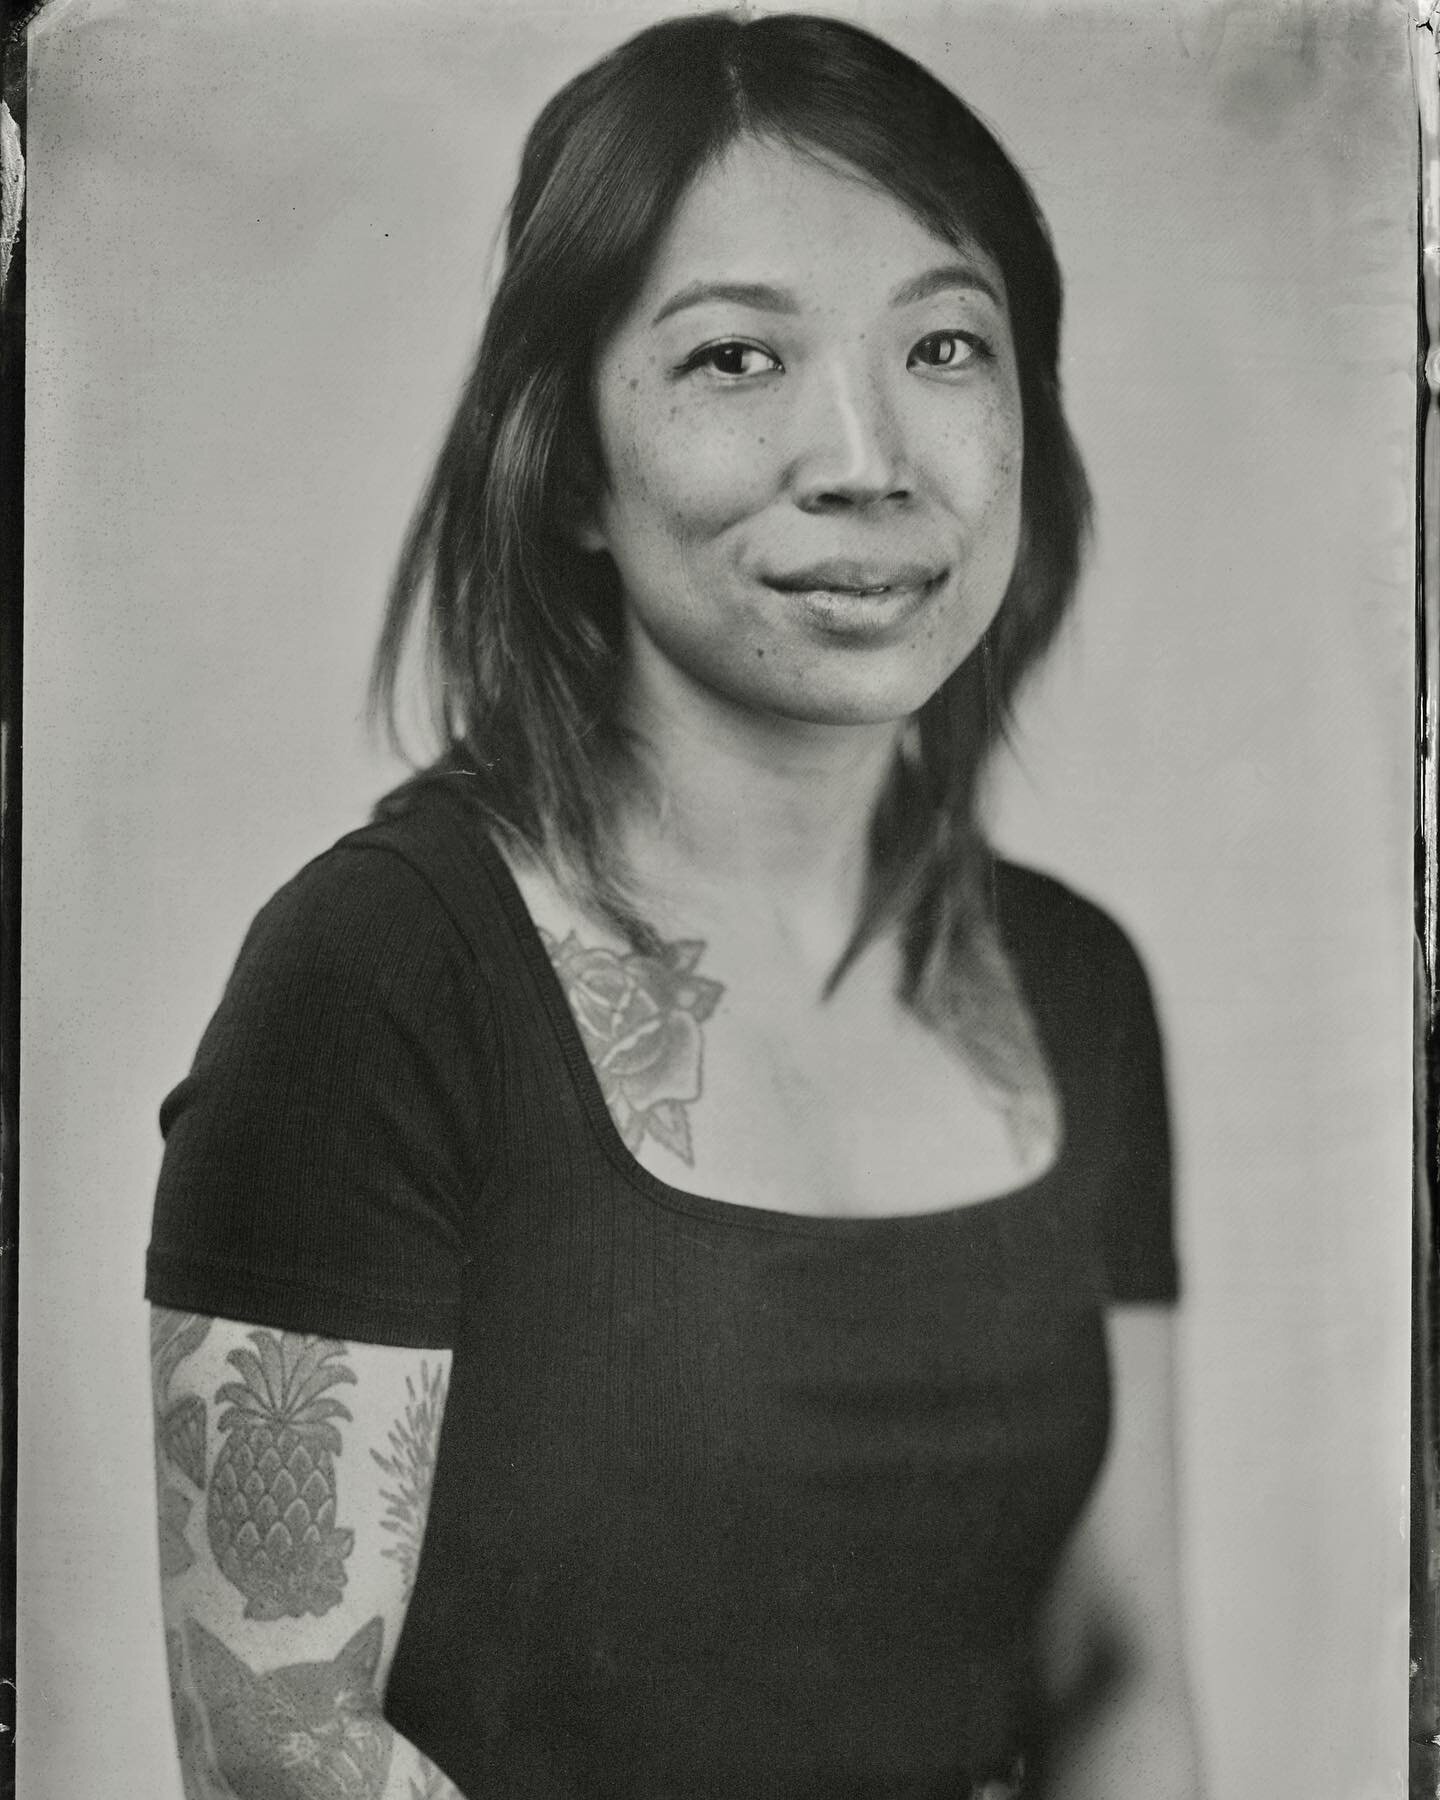 OPEN STUDIO THIS UPCOMING WEEKEND 〰️ MARCH 25
Only once a I month do I offer mini-sessions for a single tintype (I mainly do bigger sessions)- these days are what I call &quot;open studio&quot; days. Book a slot for one, or book multiple for a few ti